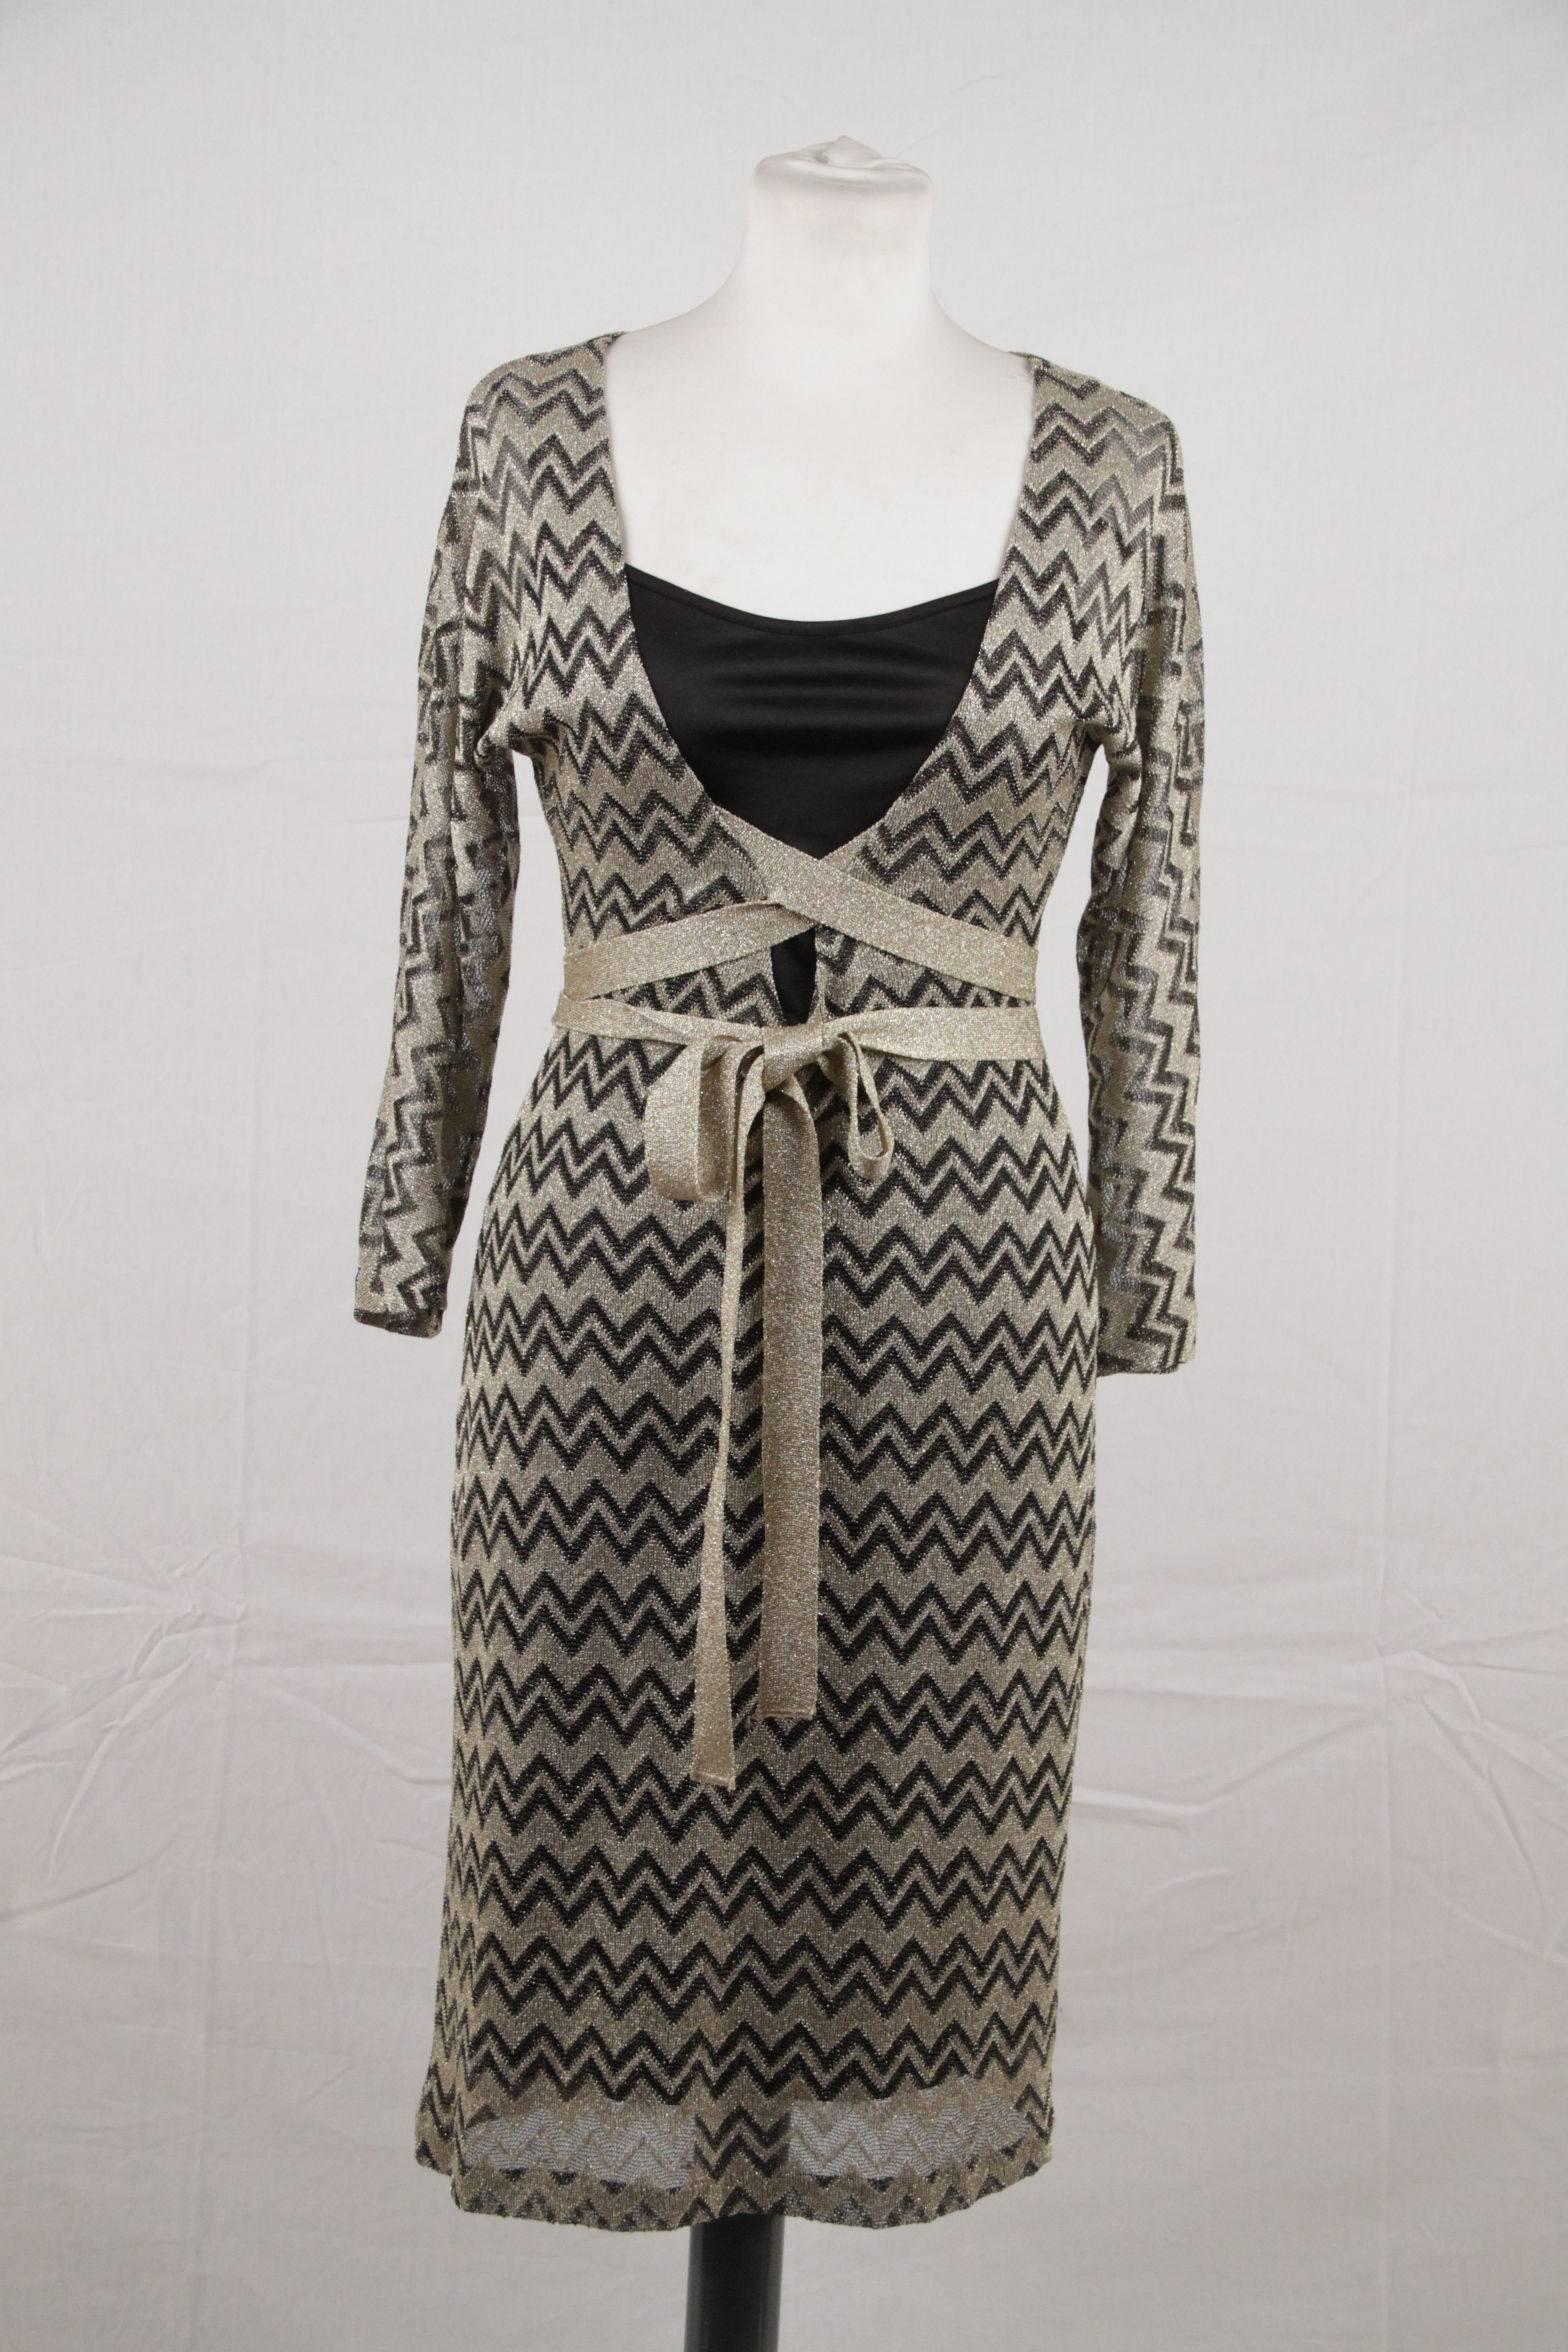 
Brand: M MISSONI

Logos / Tags: 'M MISSONI' tag

Condition rate & details (please read our condition chart below): VERY GOOD~ Previously worn with moderate wash wear/fade and or minor visible flaw(s)*

DETAILS: some pulled threads due to